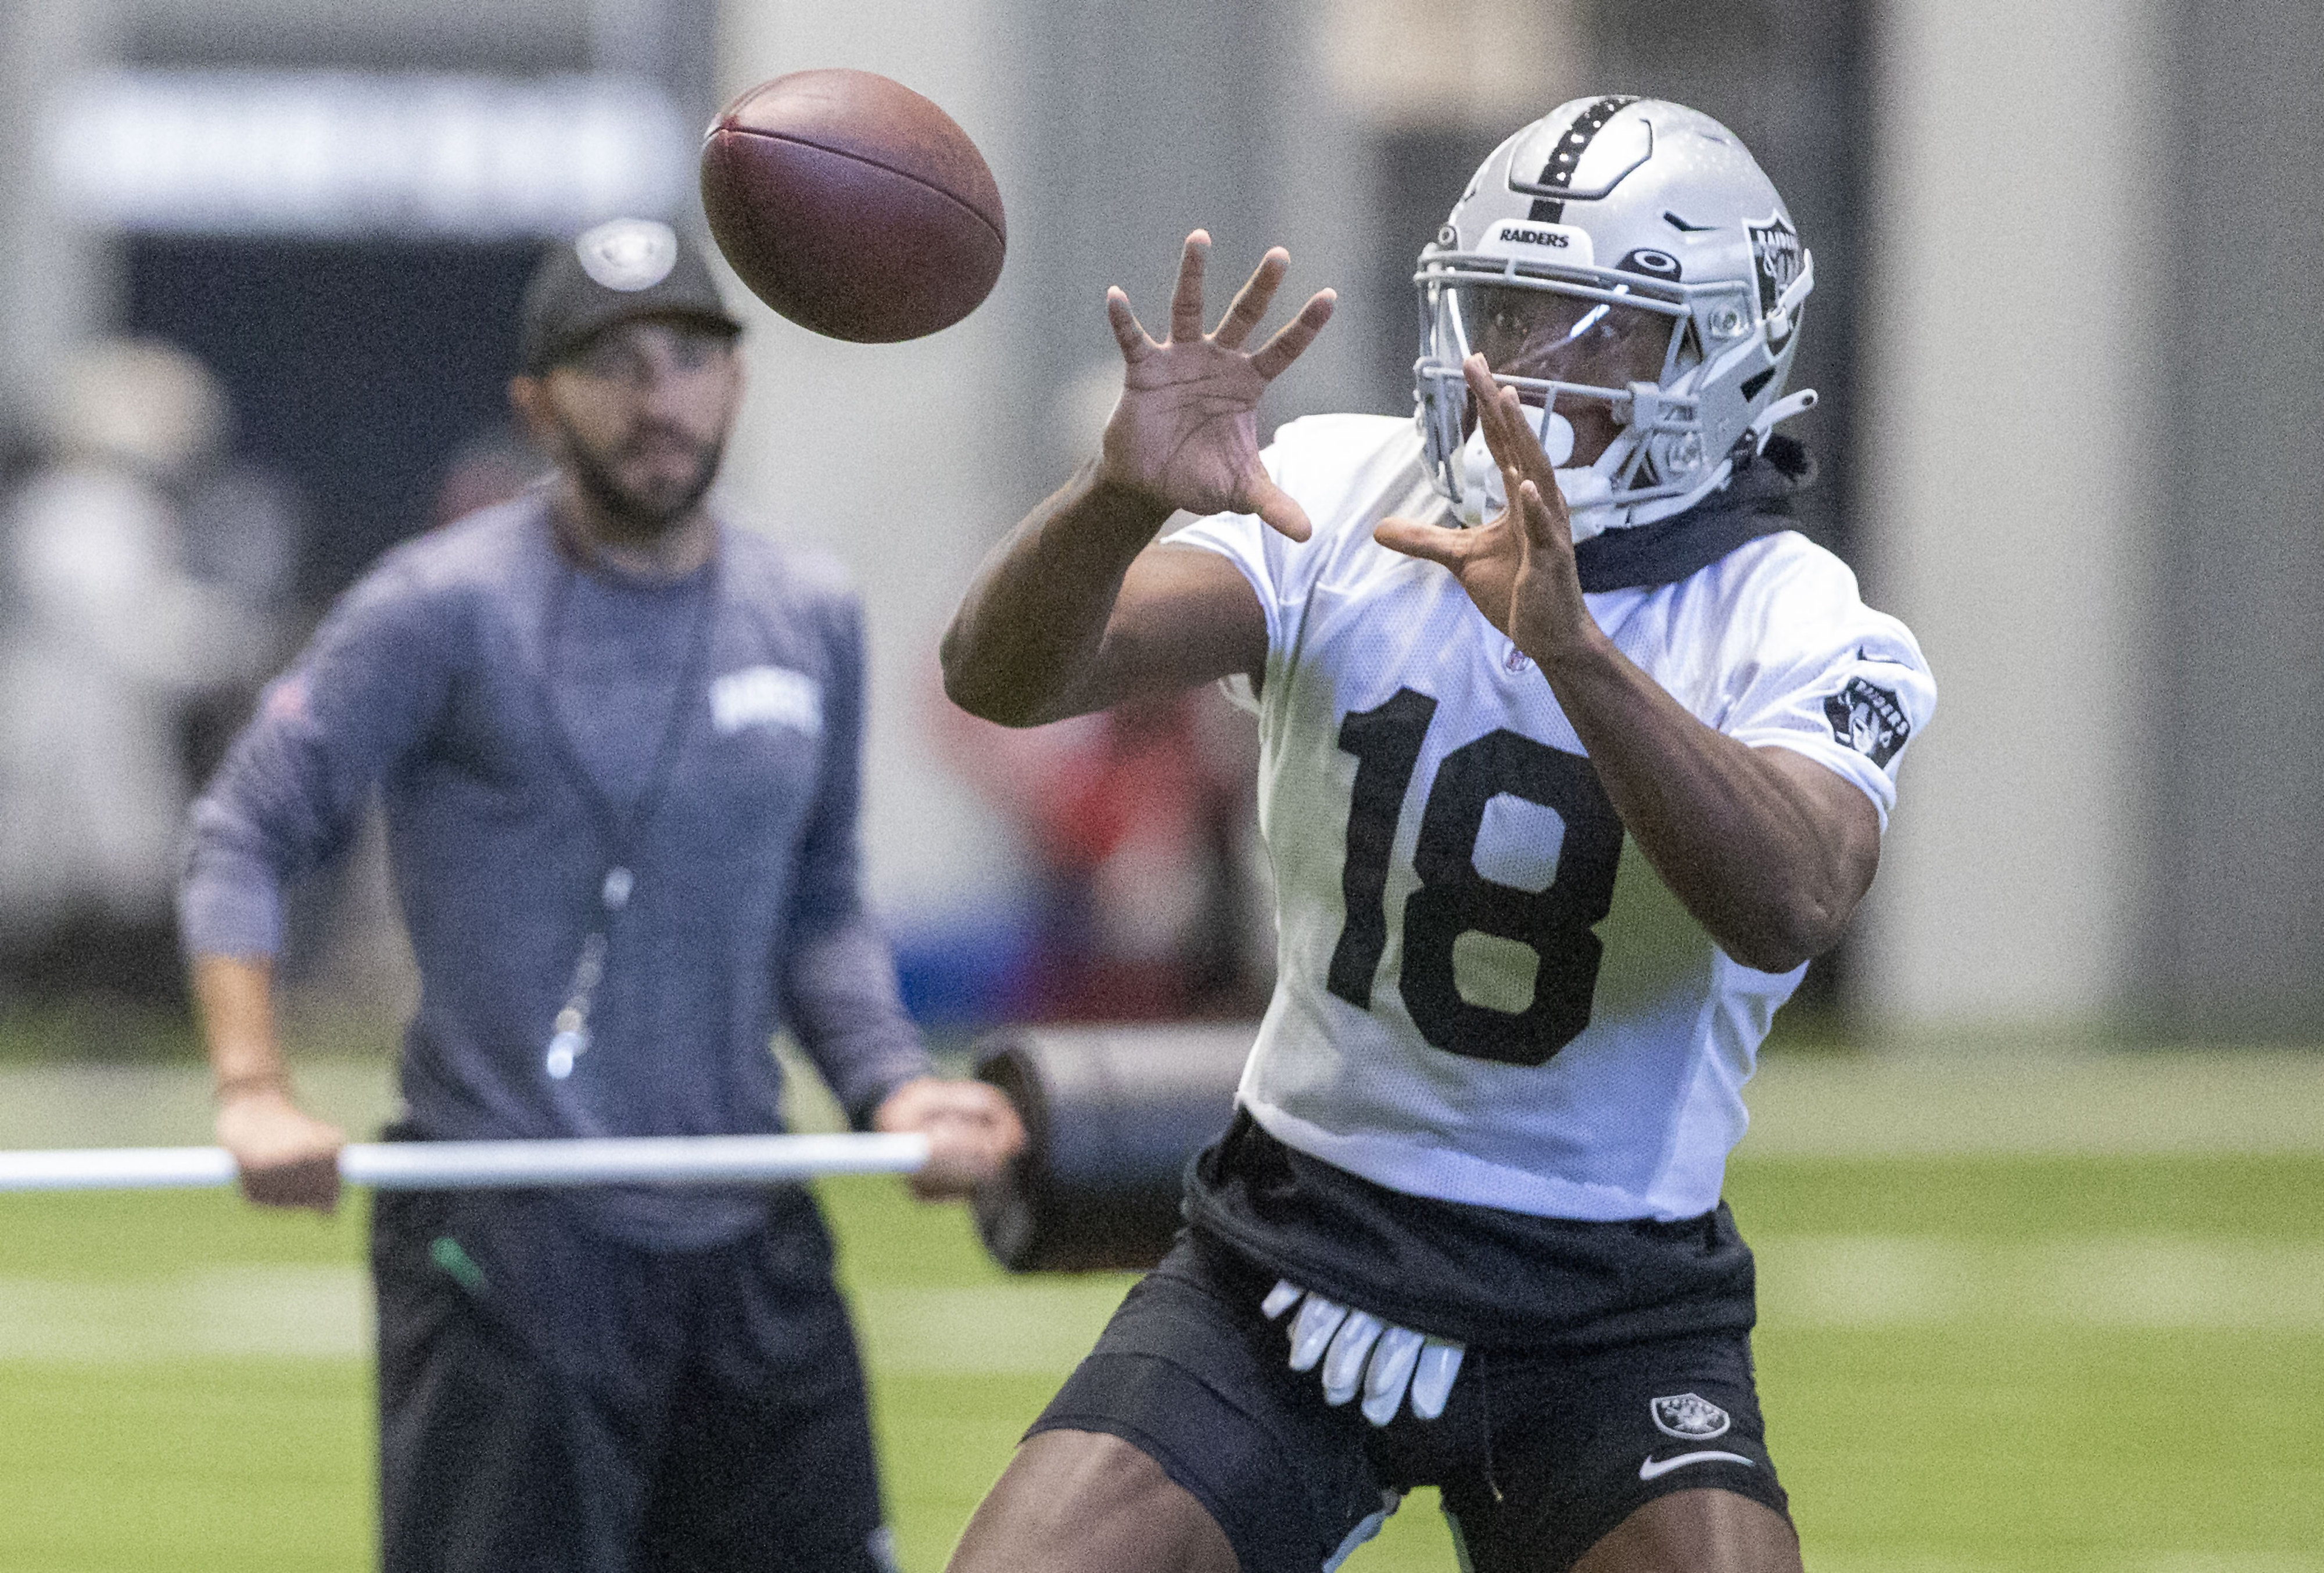 Sights and sounds from day five of Raiders training camp